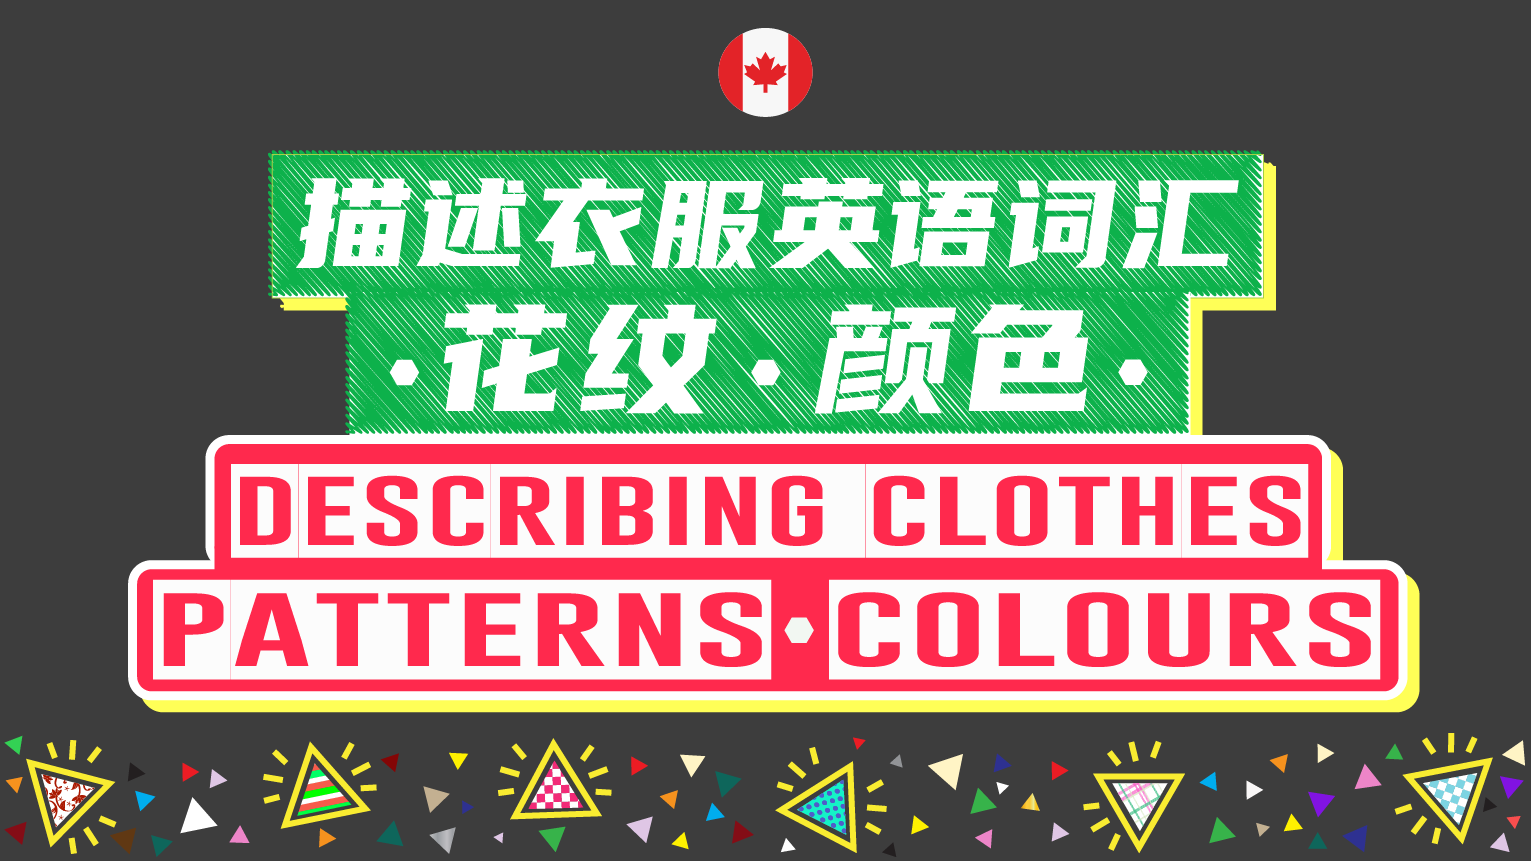 Clothes Patterns and Colours Vocabulary